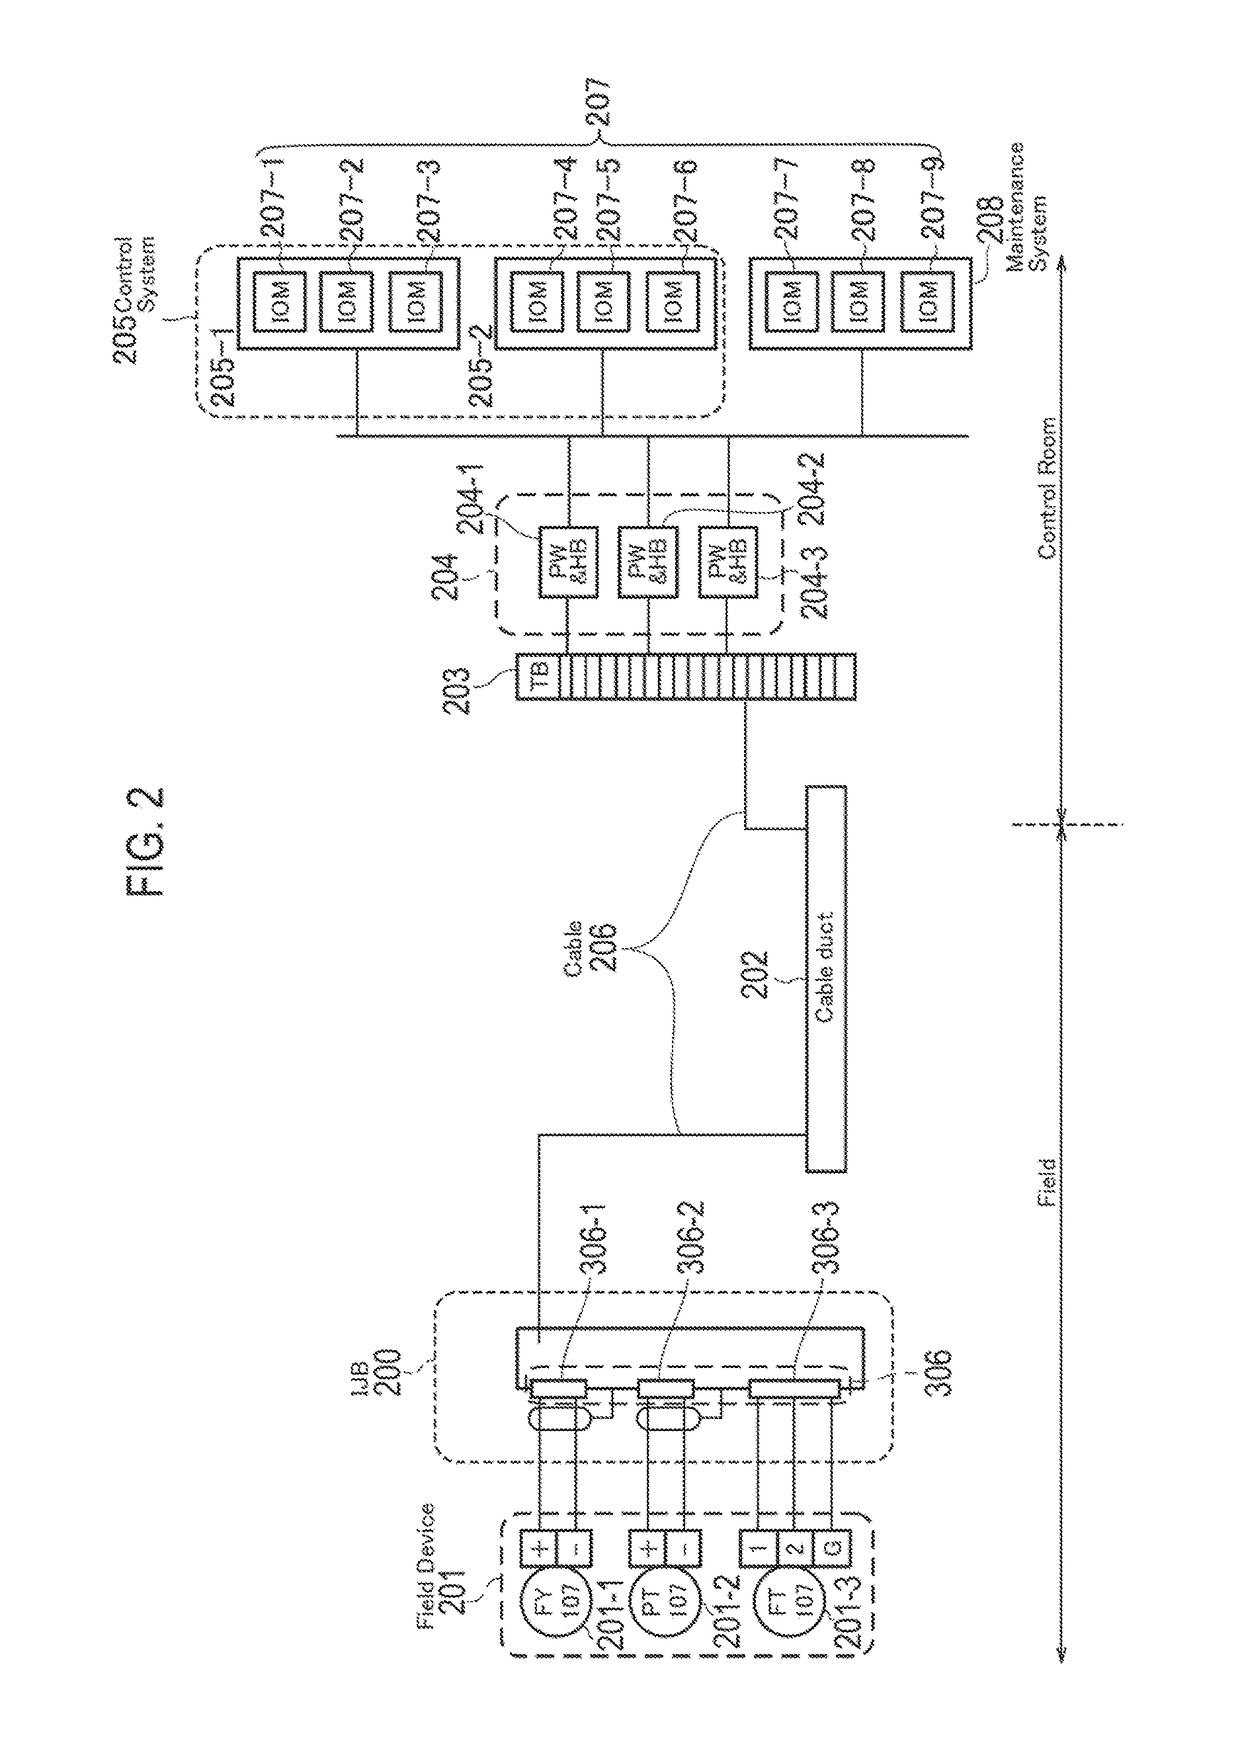 Connection equipment and a field device control system